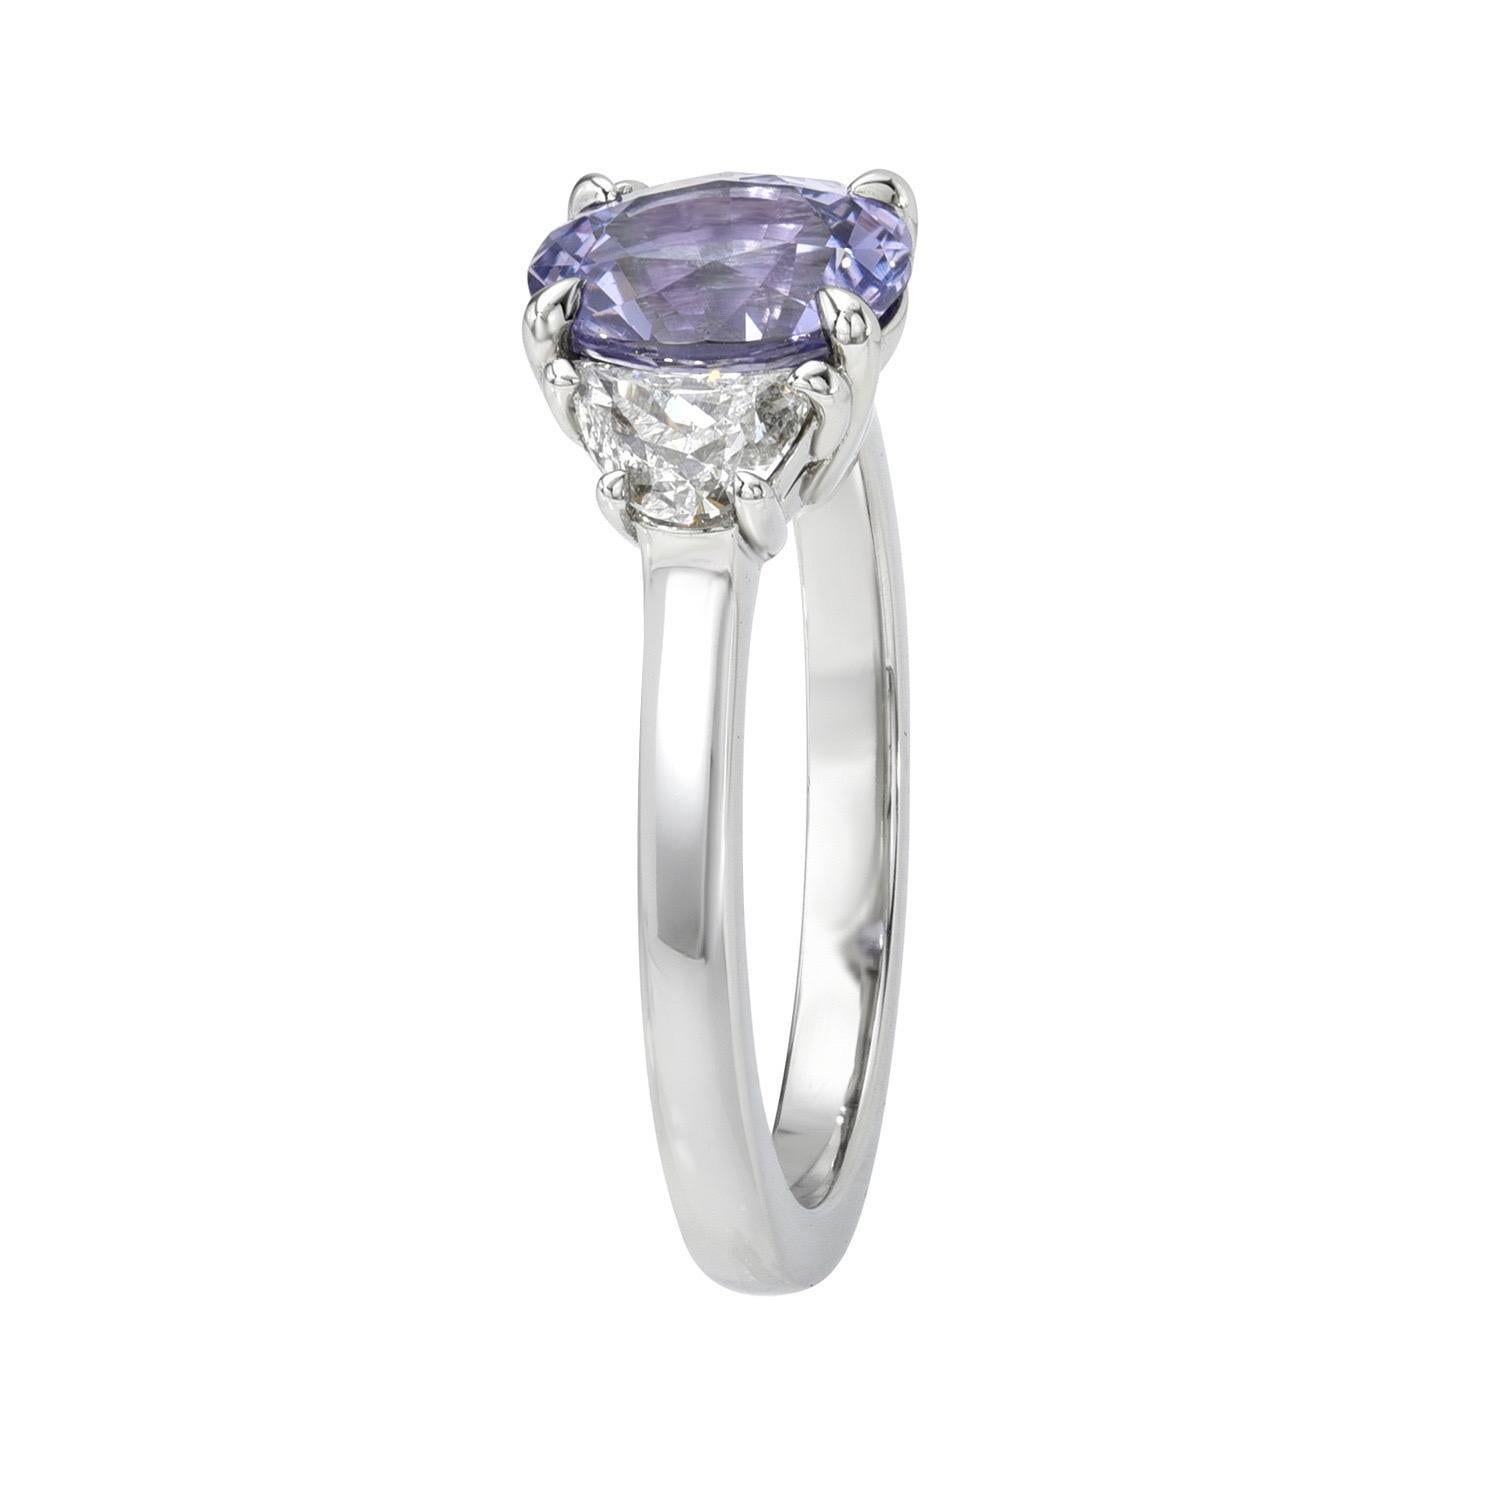 Unheated Color Change Sapphire Ring 1.71 Carat Violet To Pinkish Purple Oval In New Condition For Sale In Beverly Hills, CA